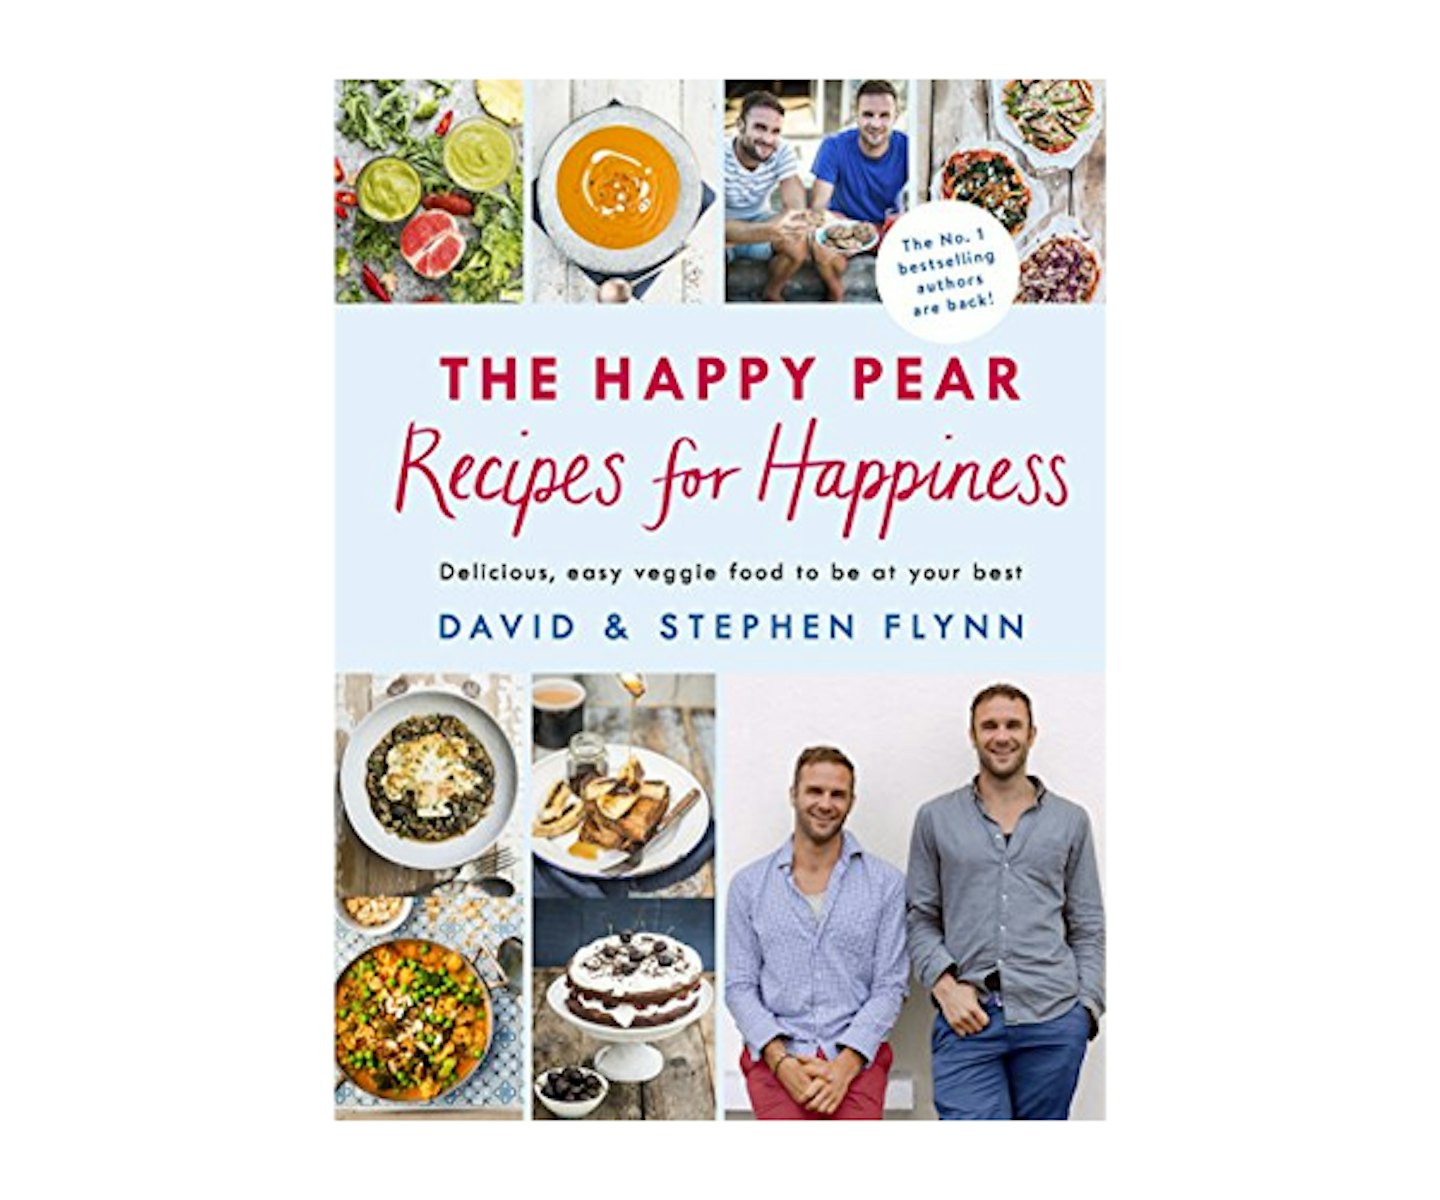 The Happy Pear Recipes for Happiness